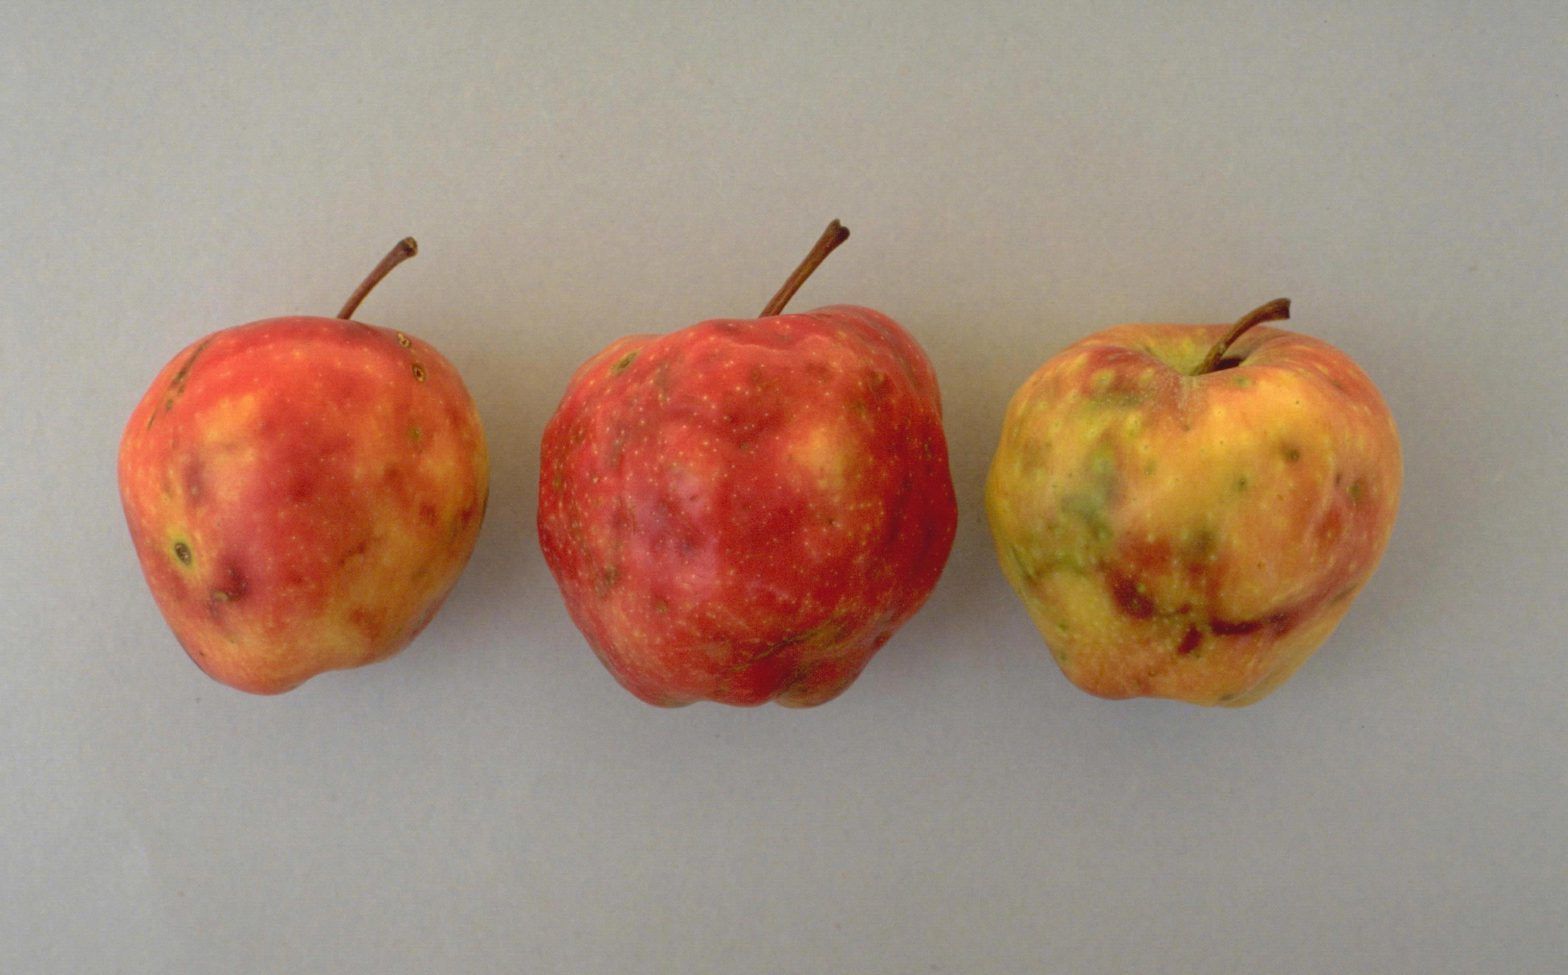 Signs of Apple Maggots feeding on the flesh on an apple - Image courtesy of the WISC.